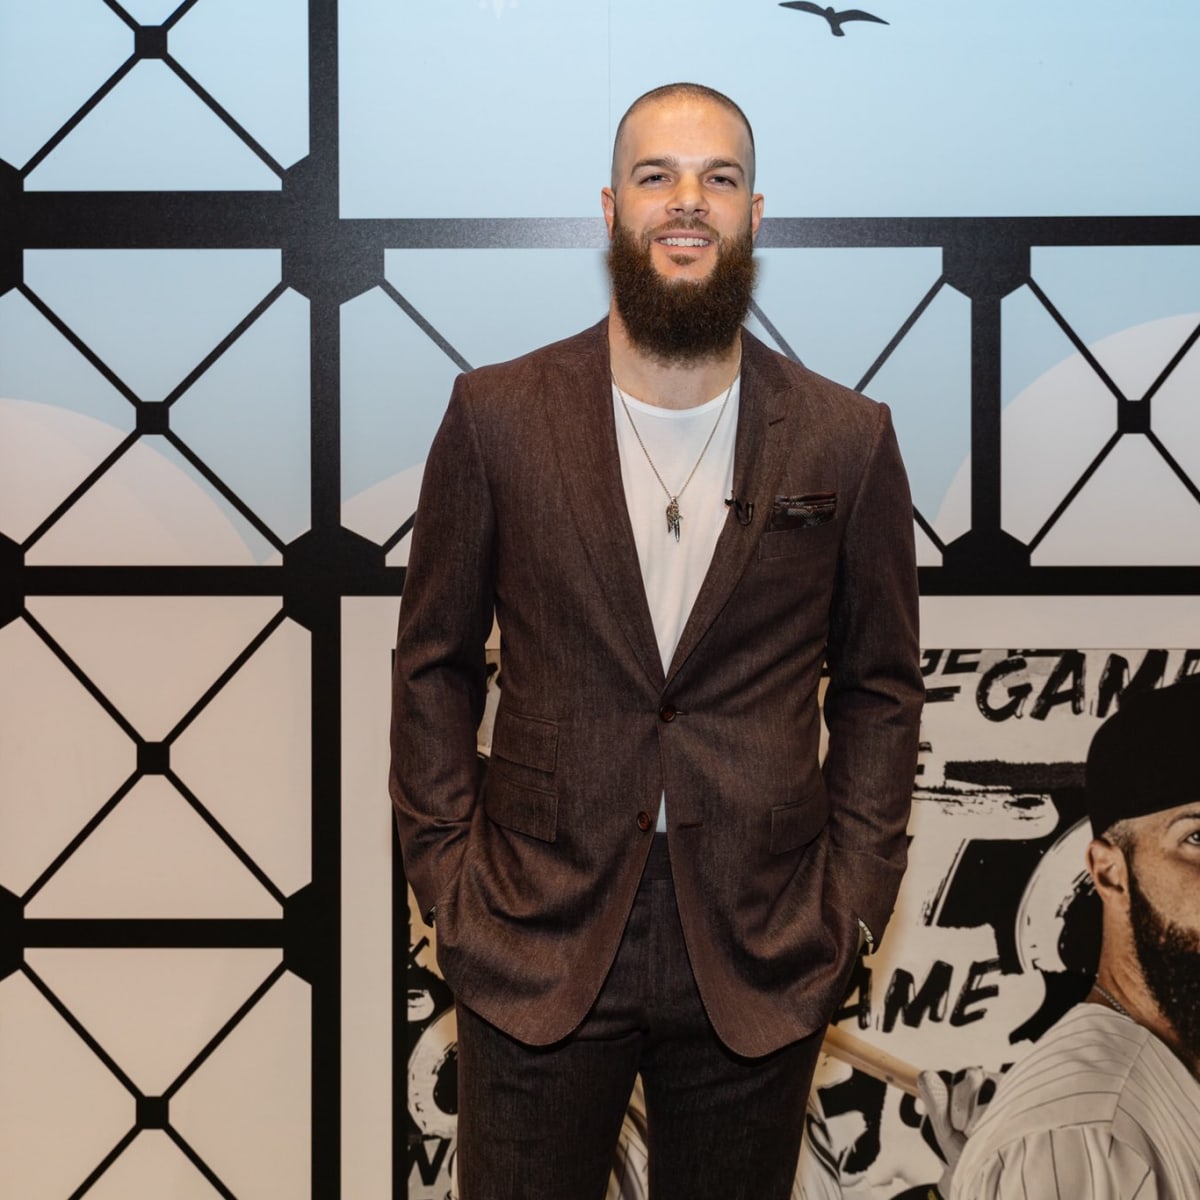 Chicago White Sox pitcher Dallas Keuchel showing his value on and